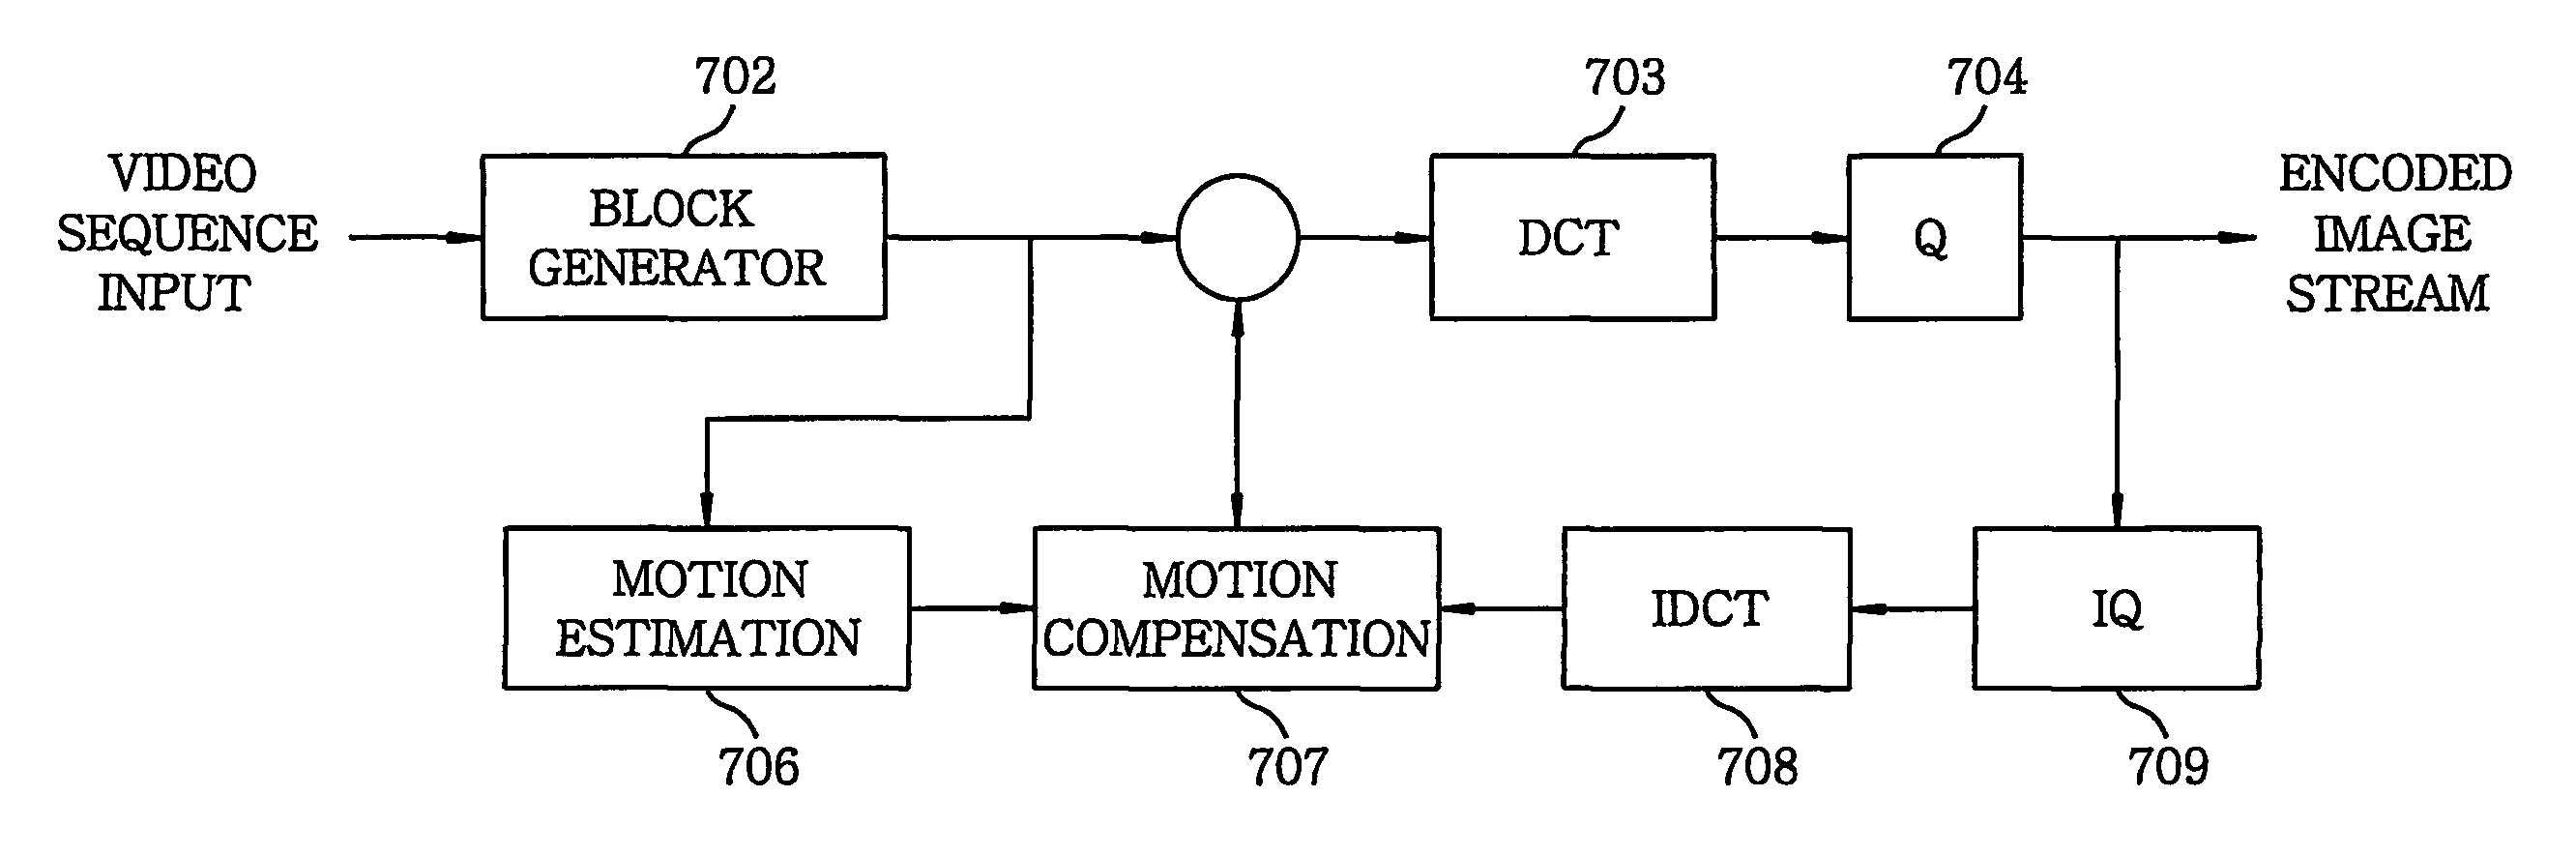 Method and apparatus for motion estimation using adaptive search pattern for video sequence compression